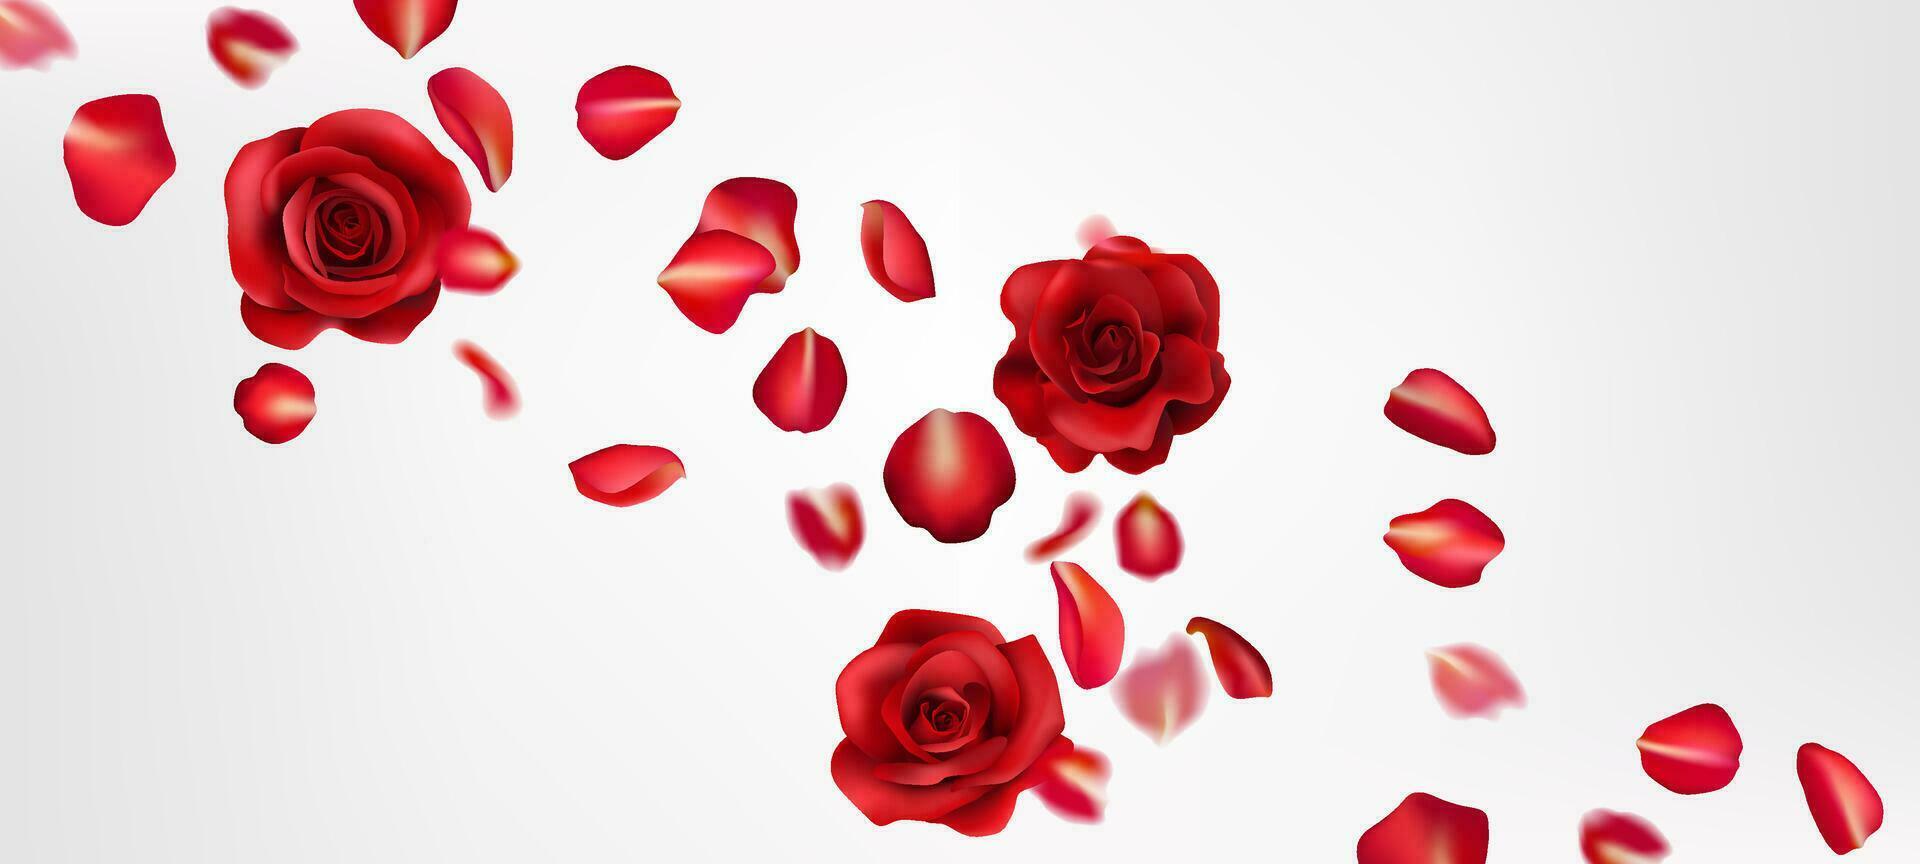 A romantic red rose realistic illustration, with flying petals. Perfect for Valentine's Day, weddings, and celebrations. Realistic details create a beautiful, natural design. Not AI. vector